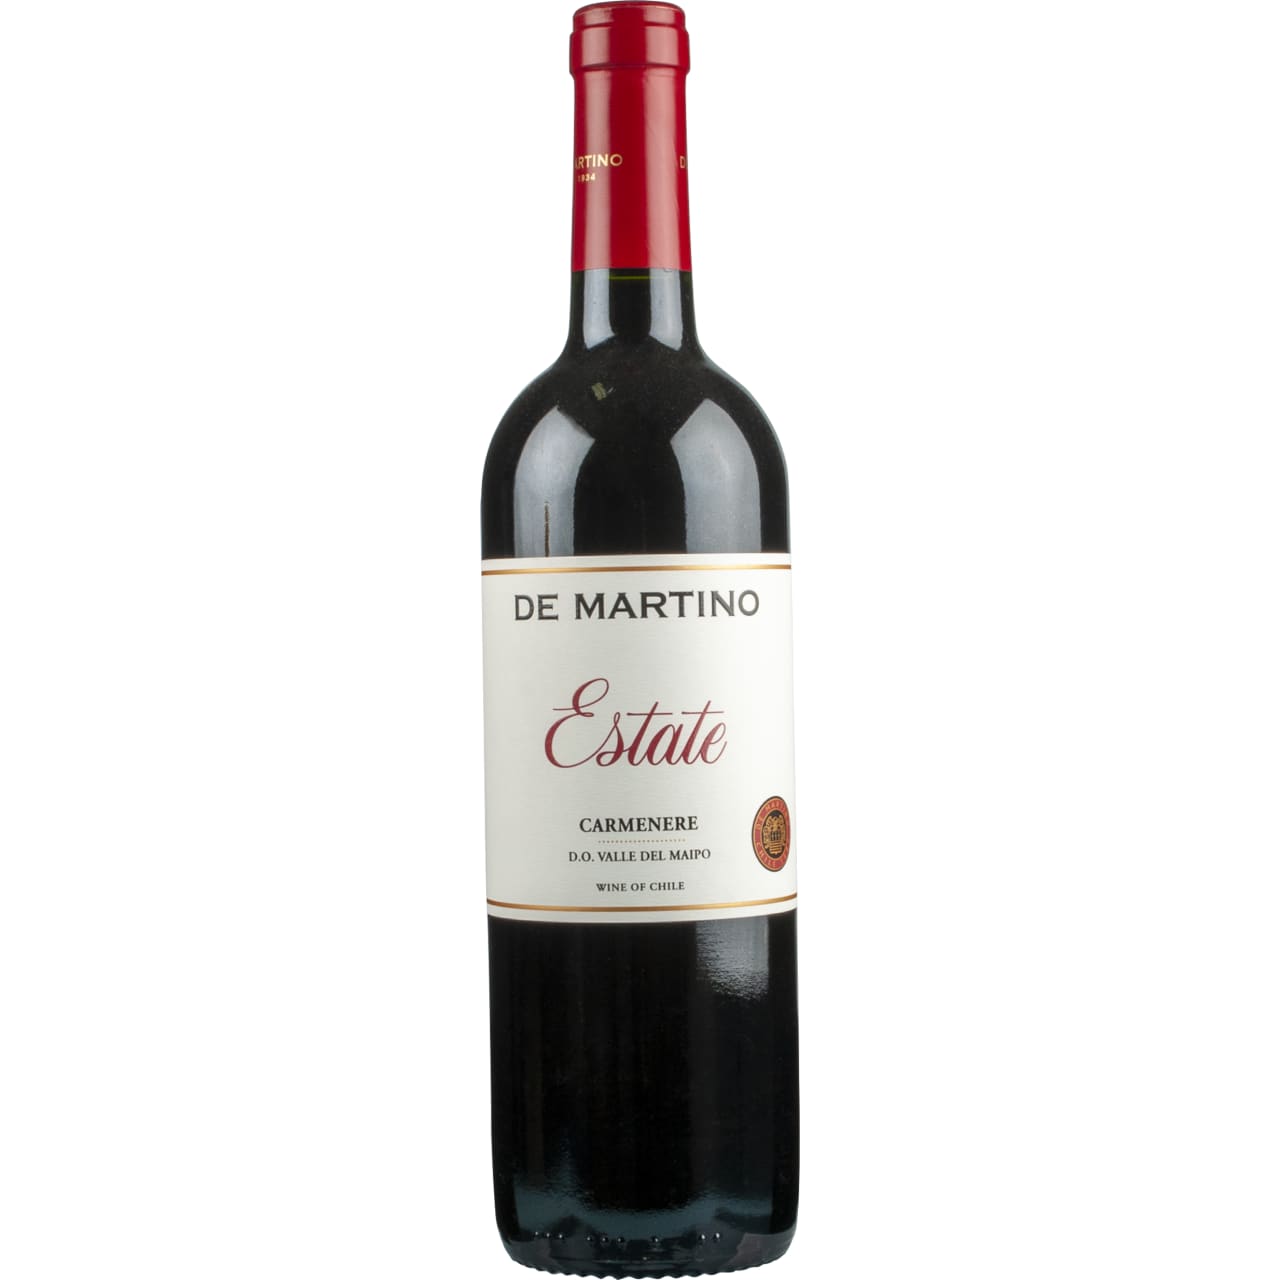 Fruity and intense with notes of fresh ripe blackberries, pepper and spices.